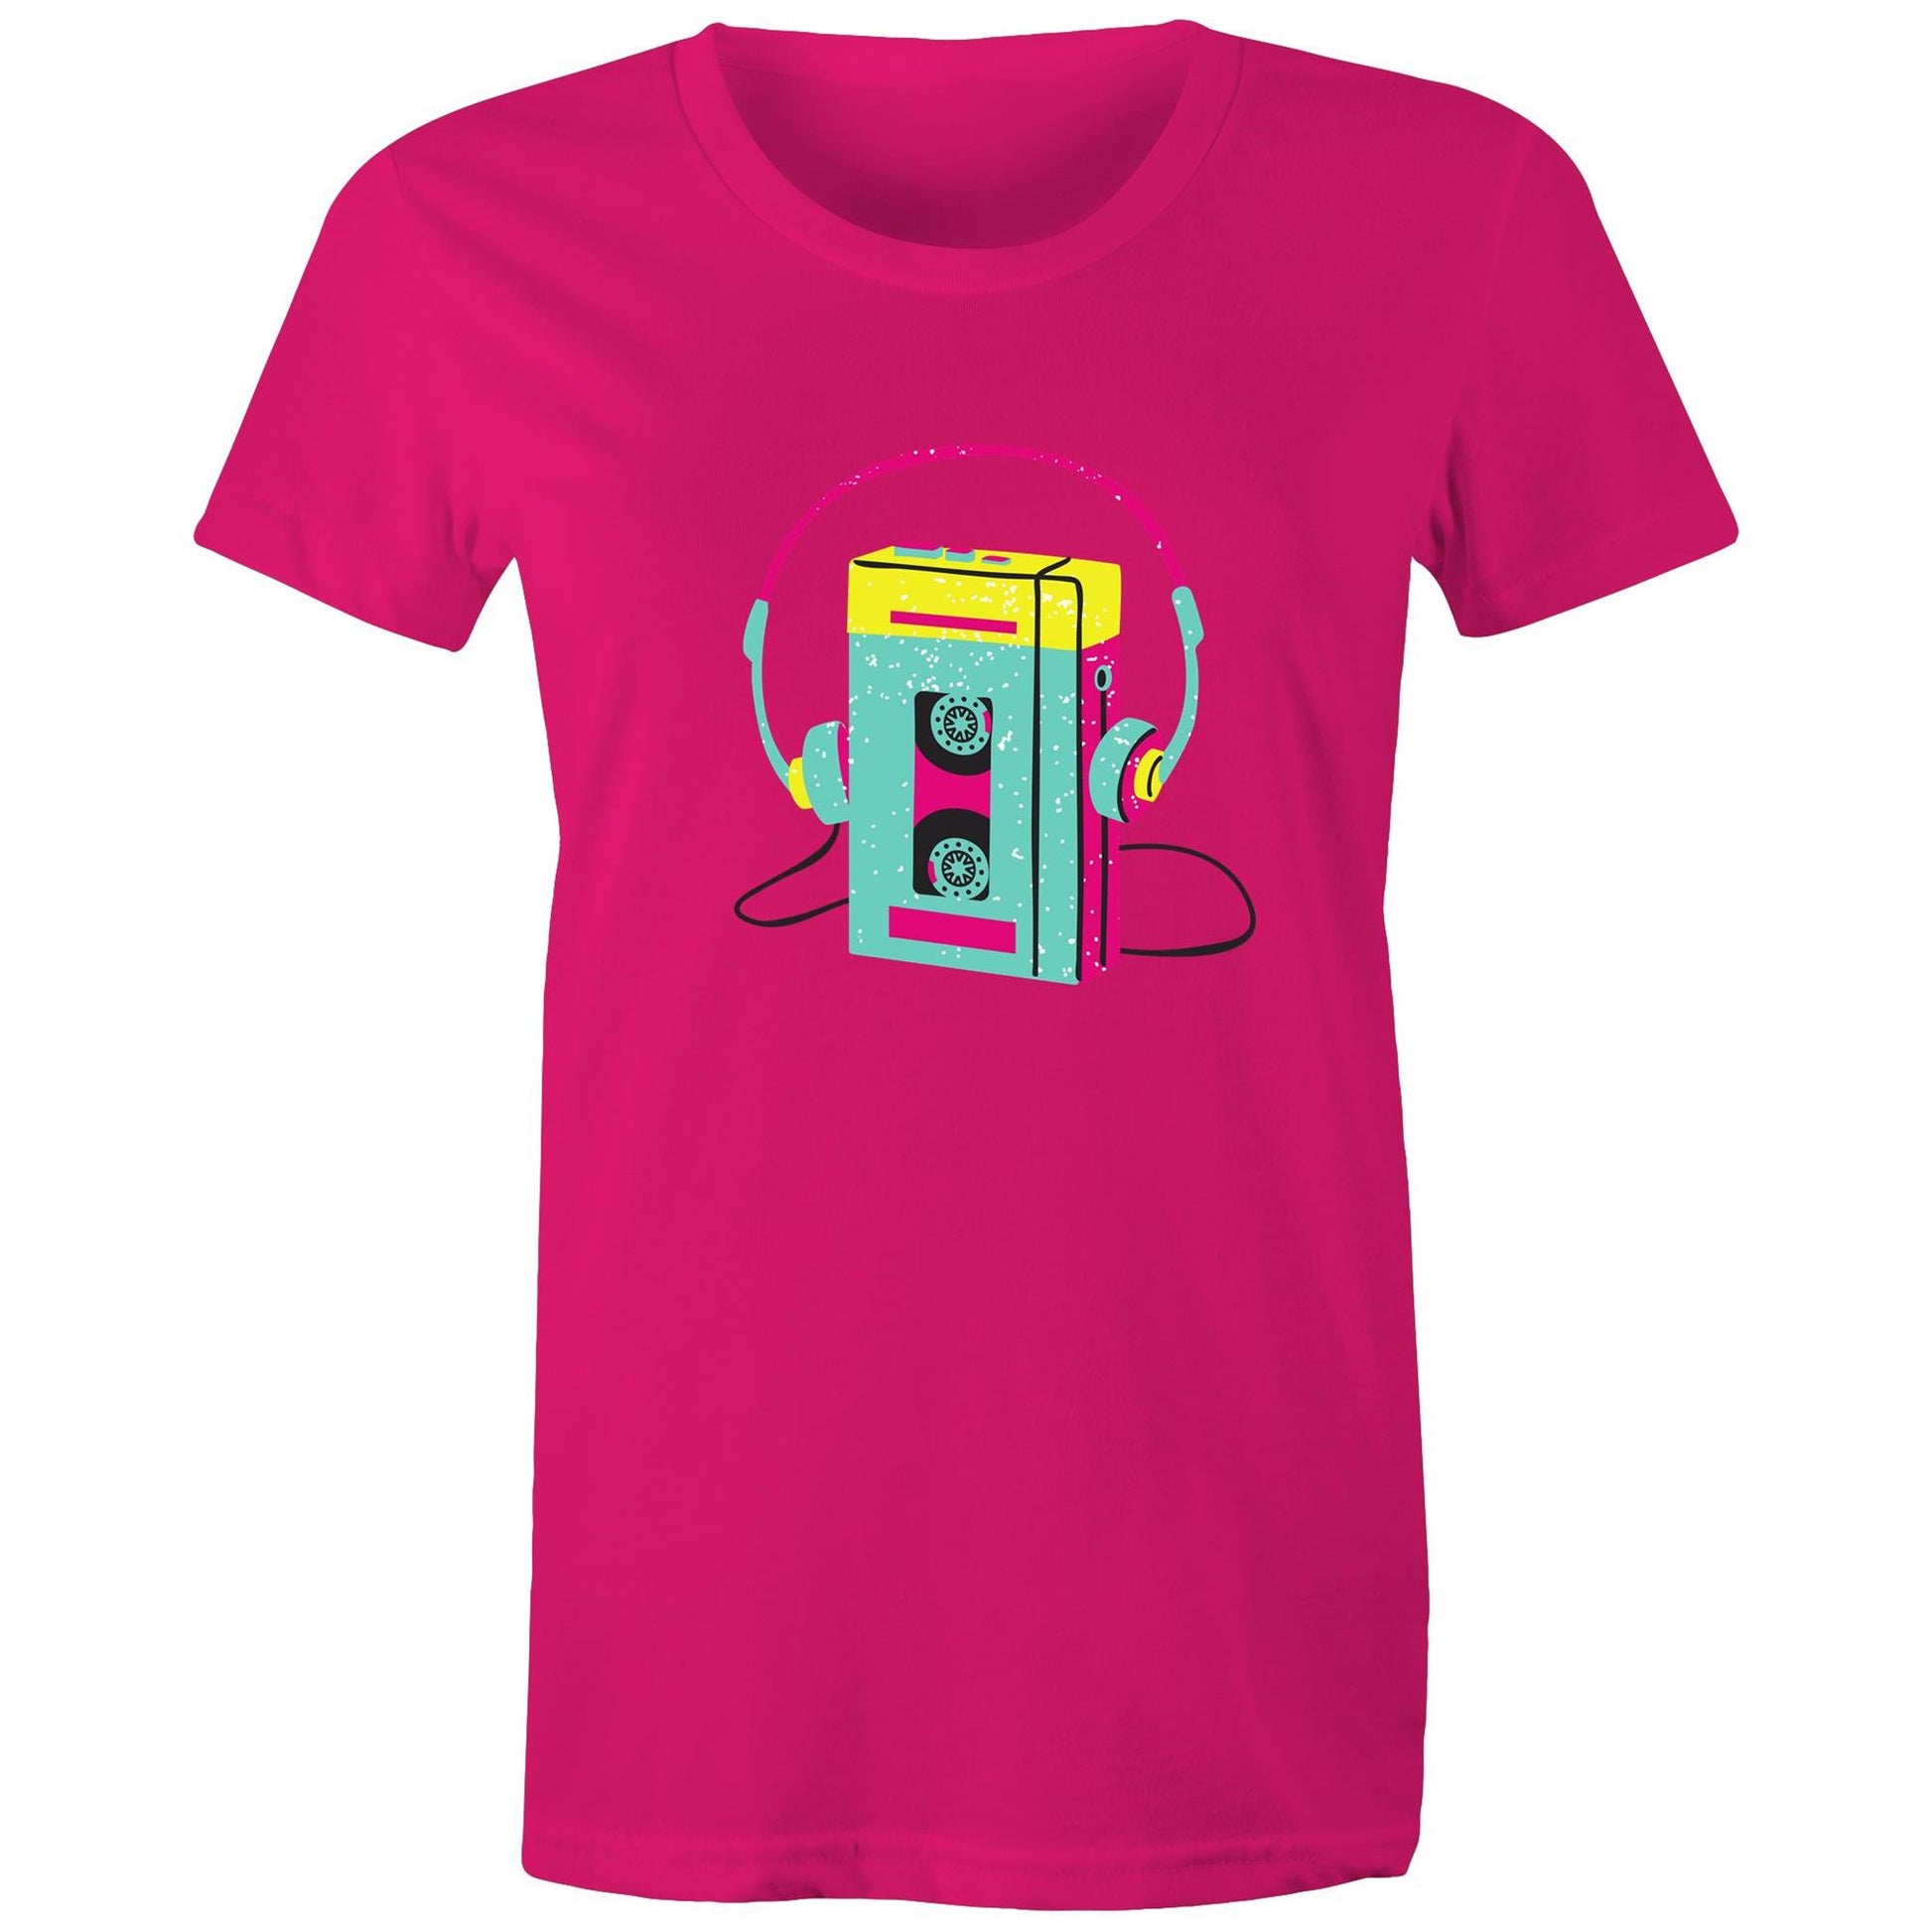 Wired For Sound, Music Player - Womens T-shirt Fuchsia Womens T-shirt Music Retro Womens